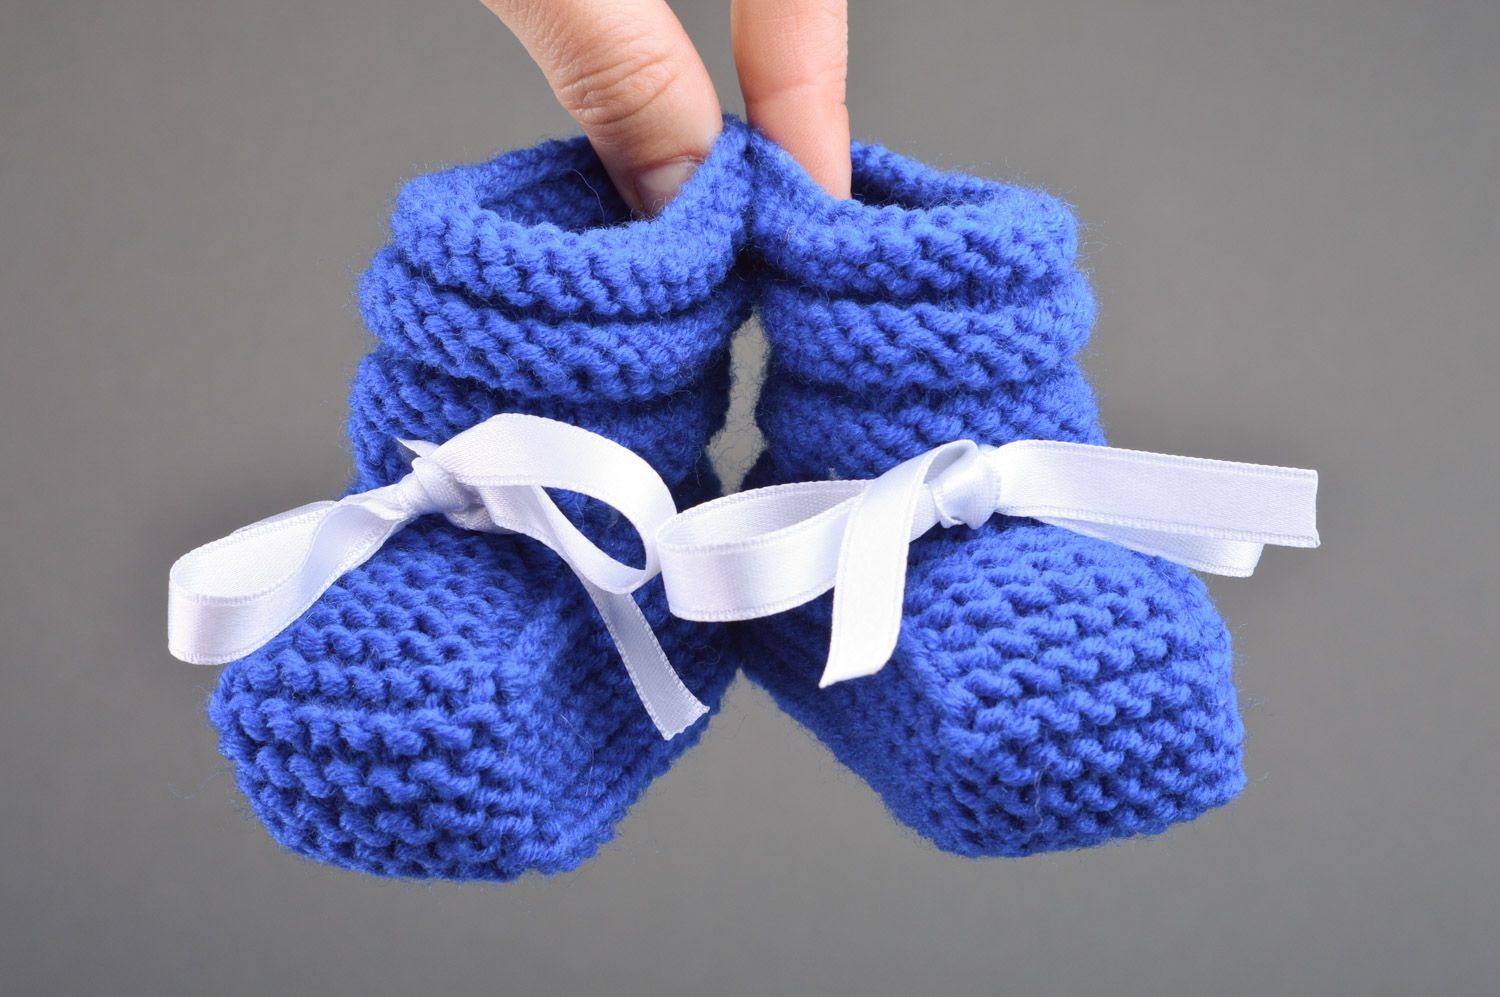 Handmade baby booties knitted of bright blue semi-woolen threads with satin bow photo 3